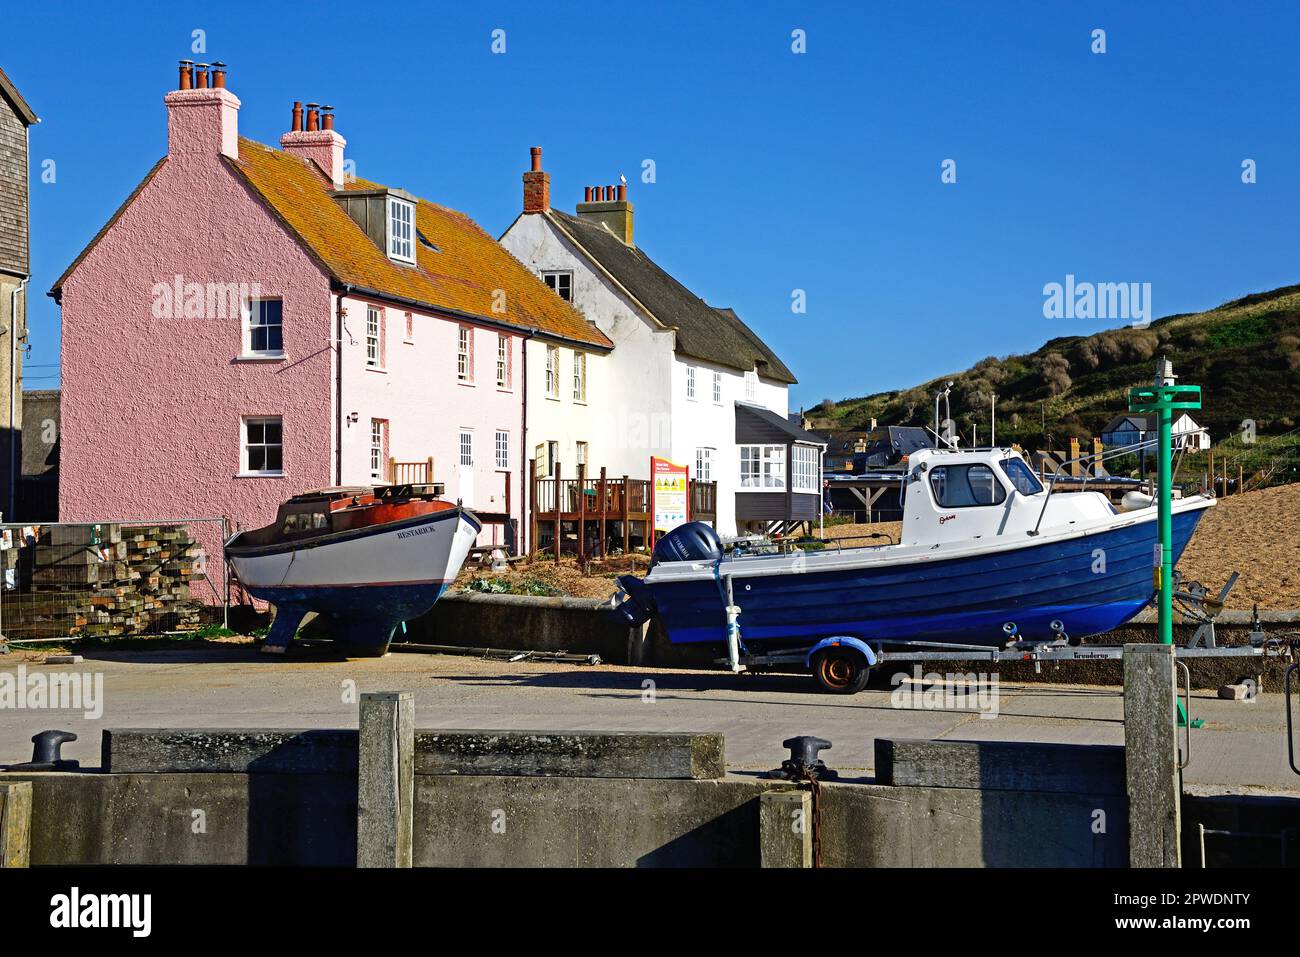 Fishing boats in dry dock with pretty beachside cottages to the rear, West Bay, Dorset, UK, Europe. Stock Photo